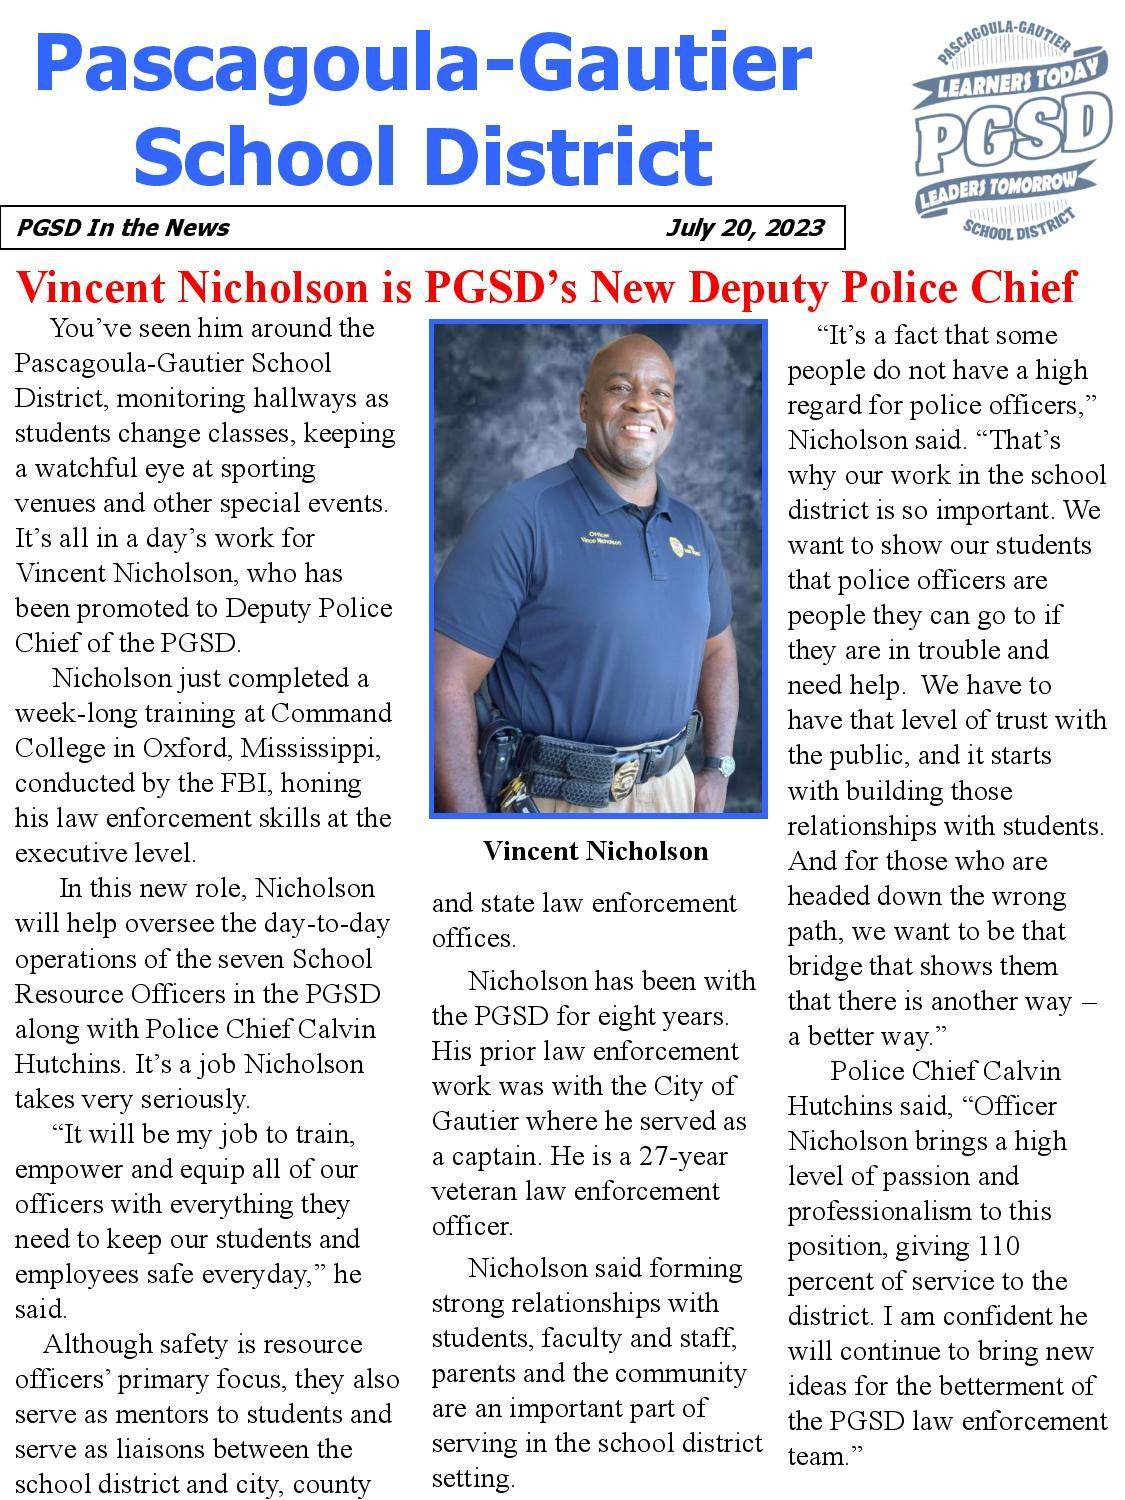 Vince Nicholson Named as PGSD's New Deputy Police Chief